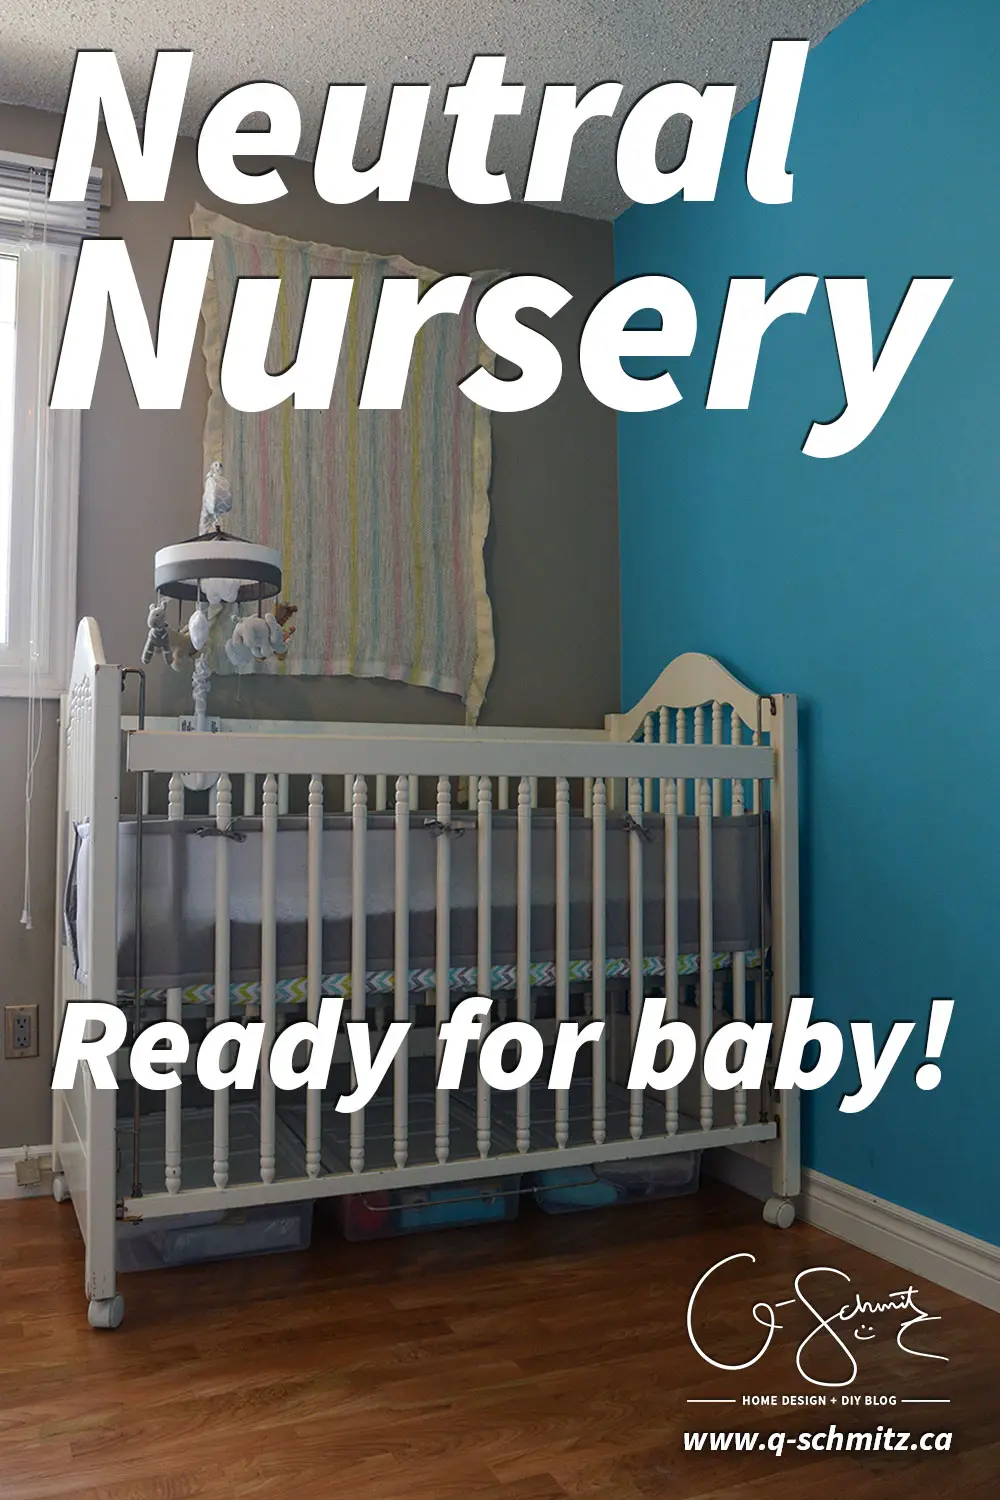 I finished our neutral nursery, and I’ve got all the essentials (crib, rocking chair, change table)… but would you mind helping decide if we need a rug?